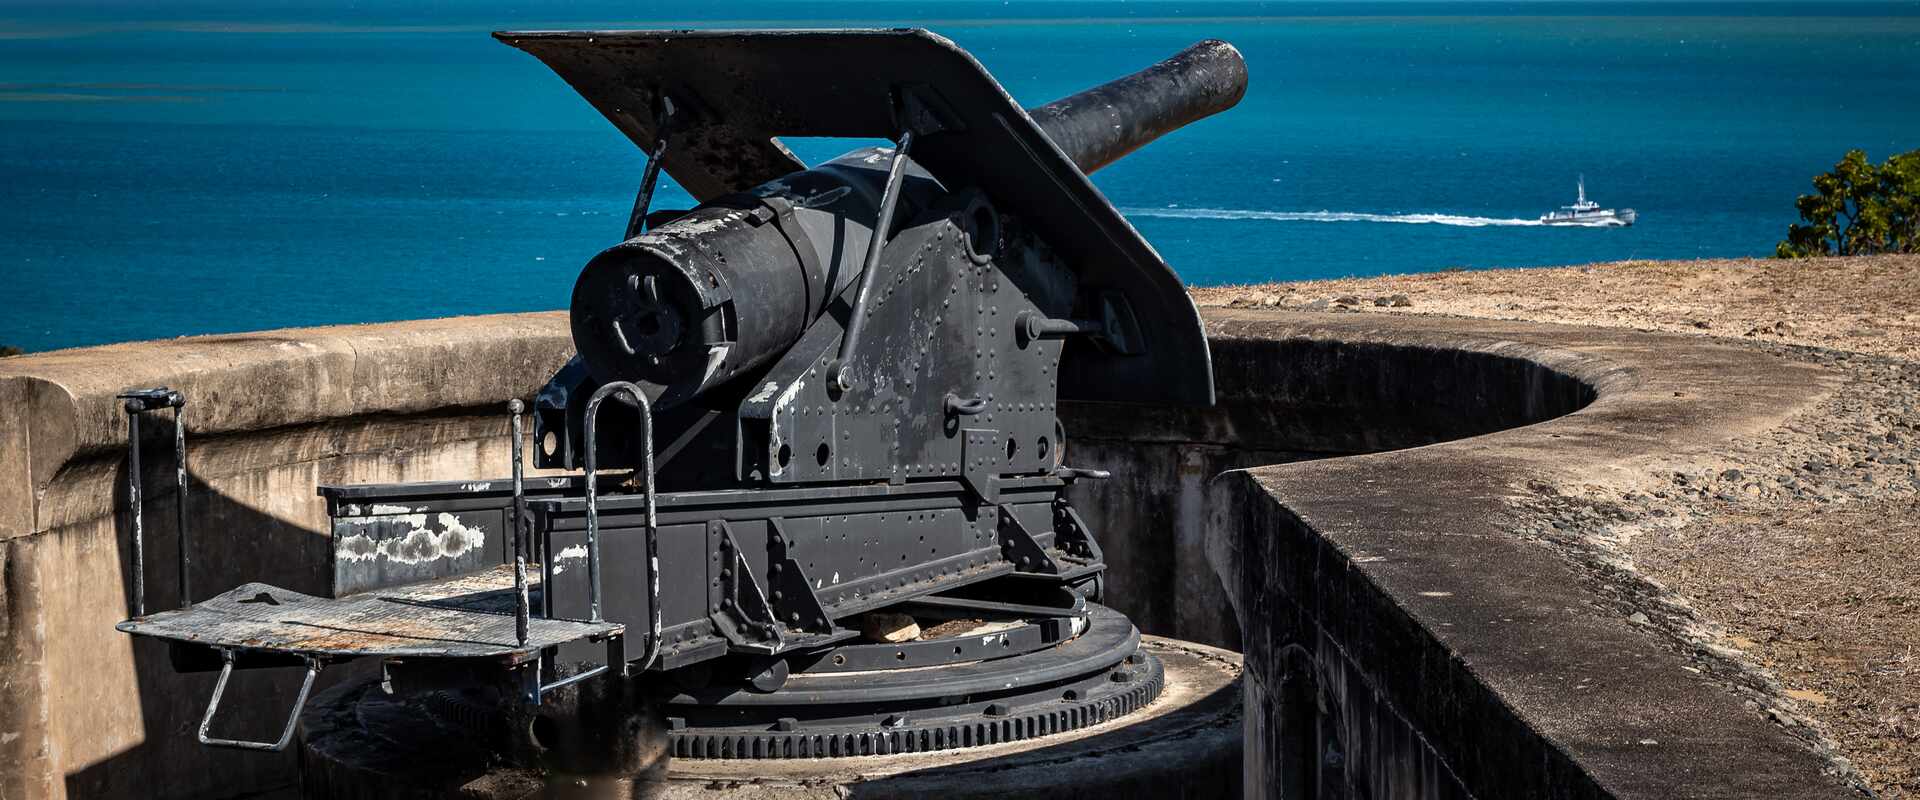 View of Thursday Island cannon, Queensland